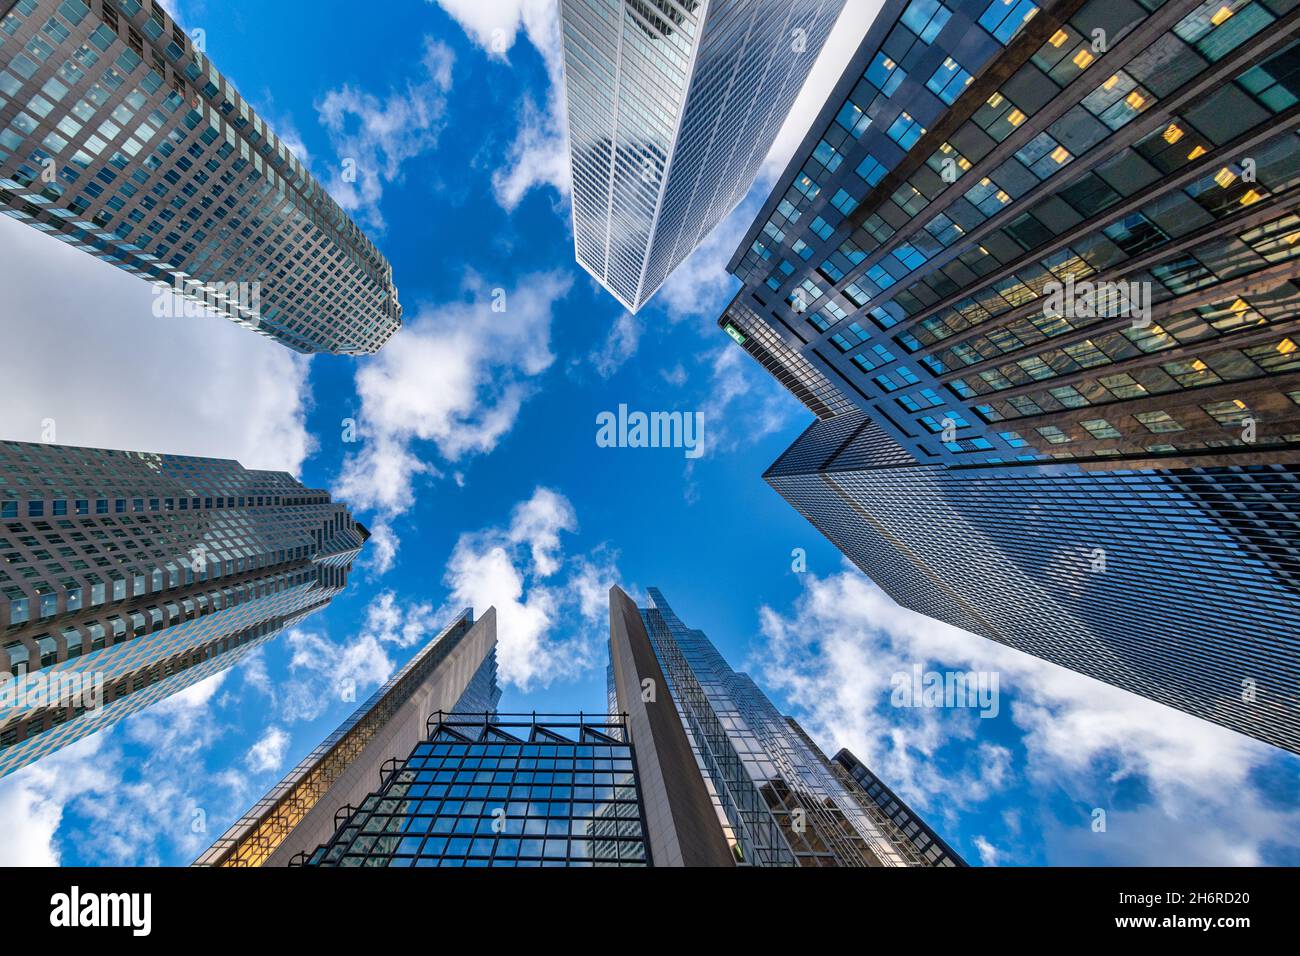 Directly below wide angle view of the skyscrapers in the financial district in Toronto, Canada. Nov. 17, 2021 Stock Photo